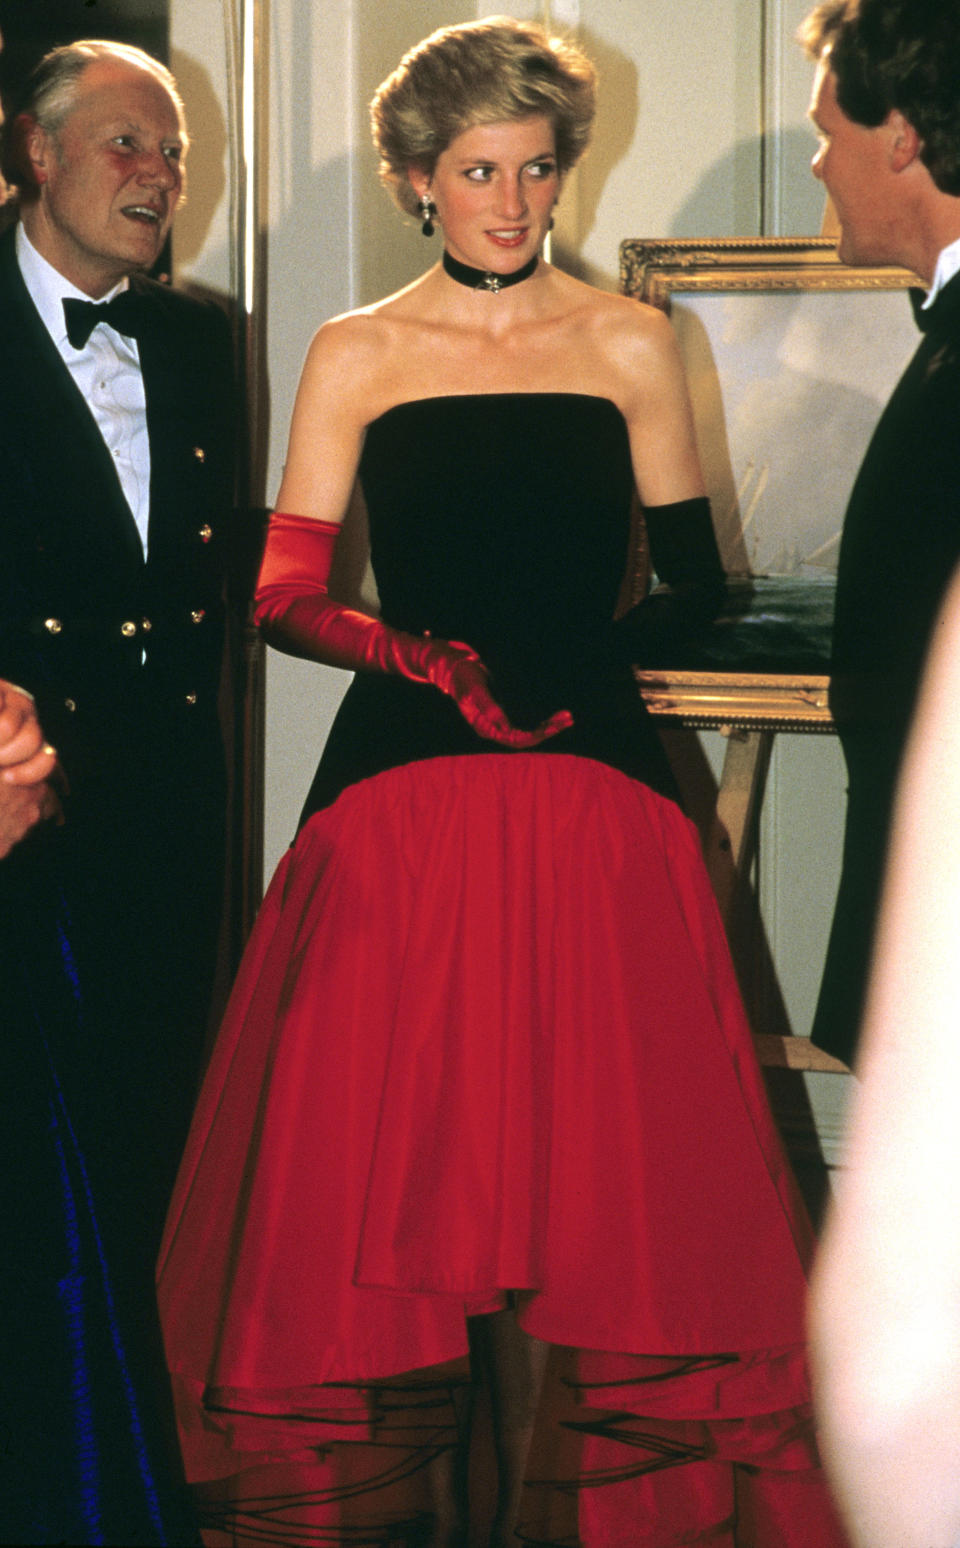 <p> This flamenco ball gown designed by Murray Arbeid (who also designed at least one other cool, architectural gown for Diana) is truly one of the more fun and daring dresses that Diana ever wore as a royal. The contrasting opera gloves, the matching black choker—it may have been for the America's Cup Ball, but that doesn't mean formal had to be boring. It was also a hint at the fun and sometimes quirky style that Diana was capable of. </p>